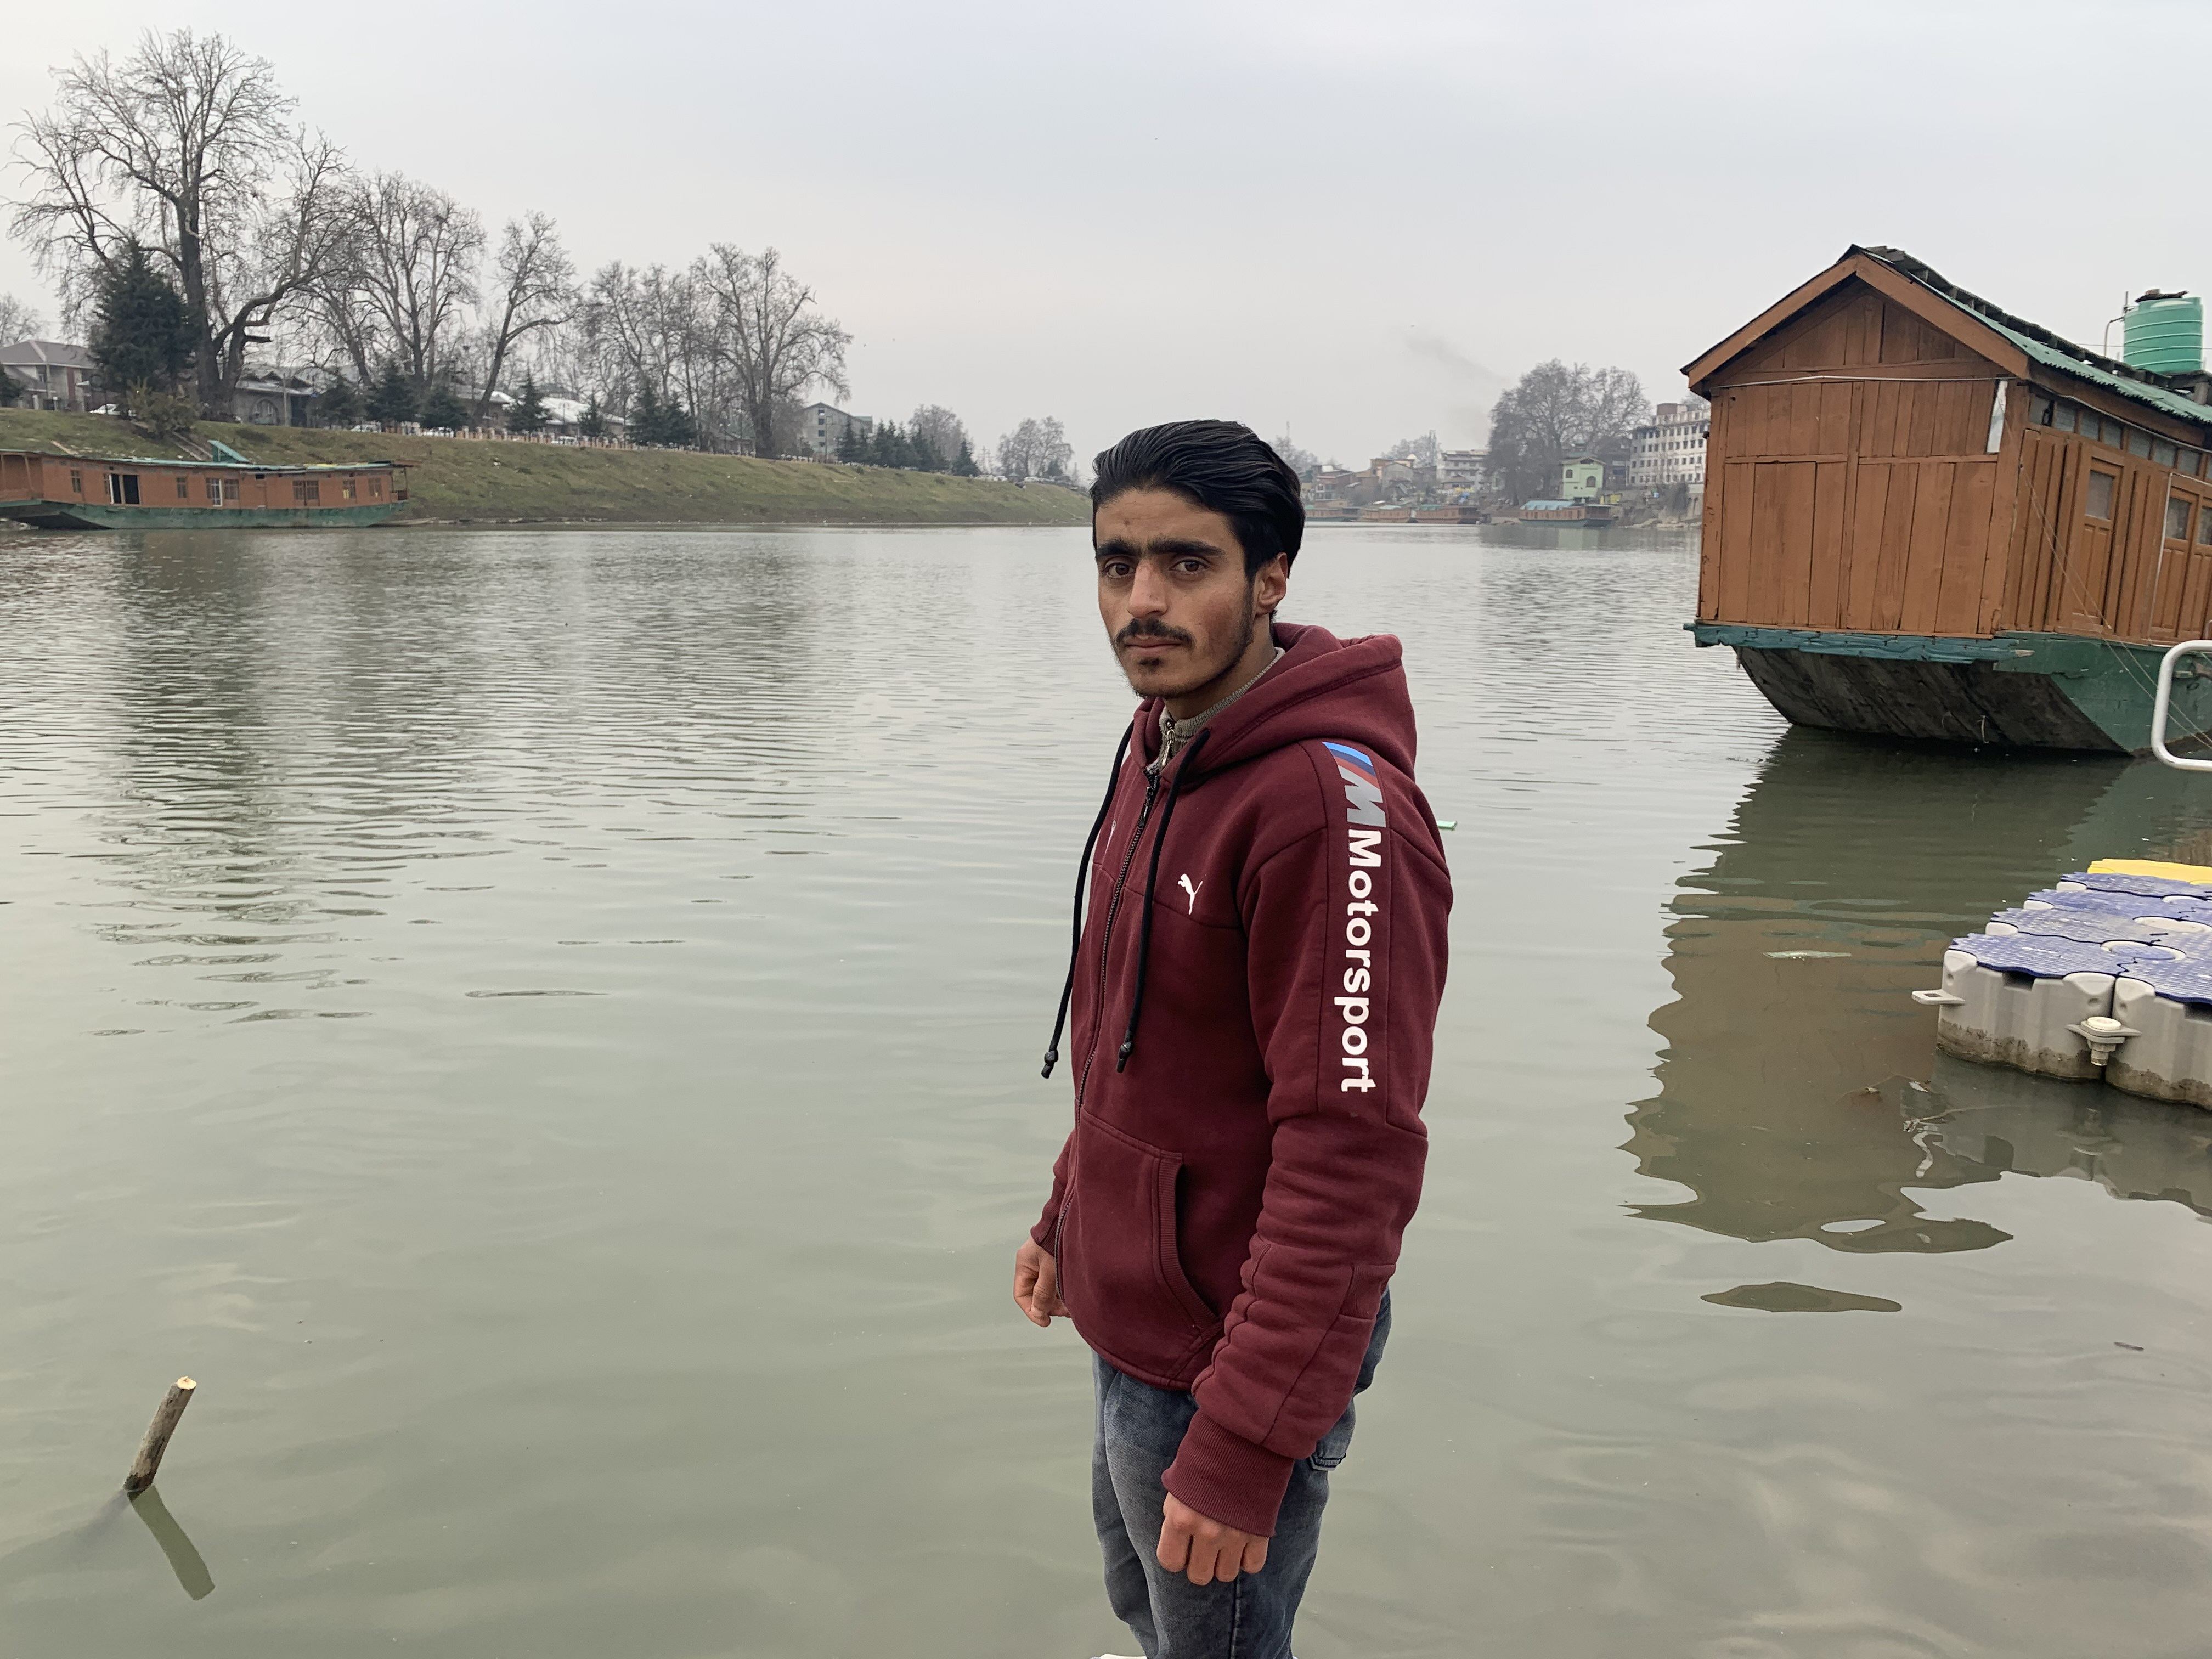 Bilal Ahmad Dar stands at the bank of the Jhelum river in the evening after finishing his Covid-19 duties for the day. Photo: Adnan Bhat